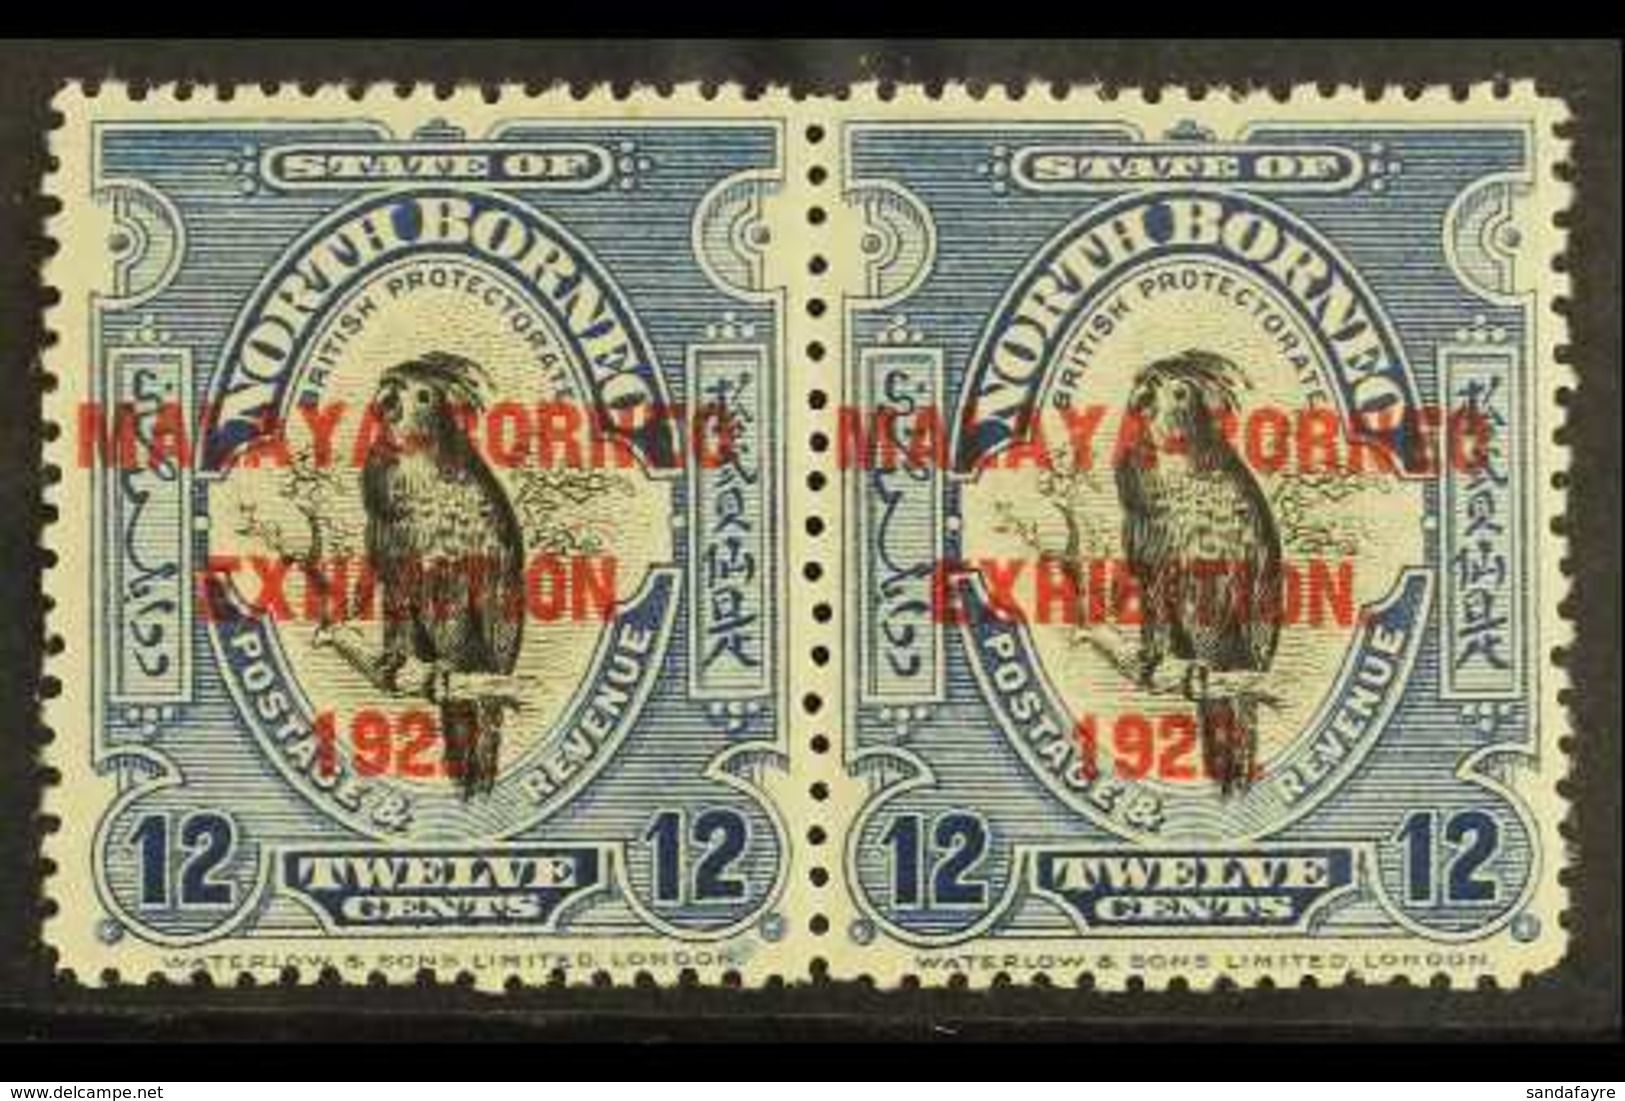 1922  12c Deep Blue Pair, One Stamp Bearing Variety "Stop After Exhibition", SG 265/265a, Fine Mint (2 Stamps) For More  - North Borneo (...-1963)